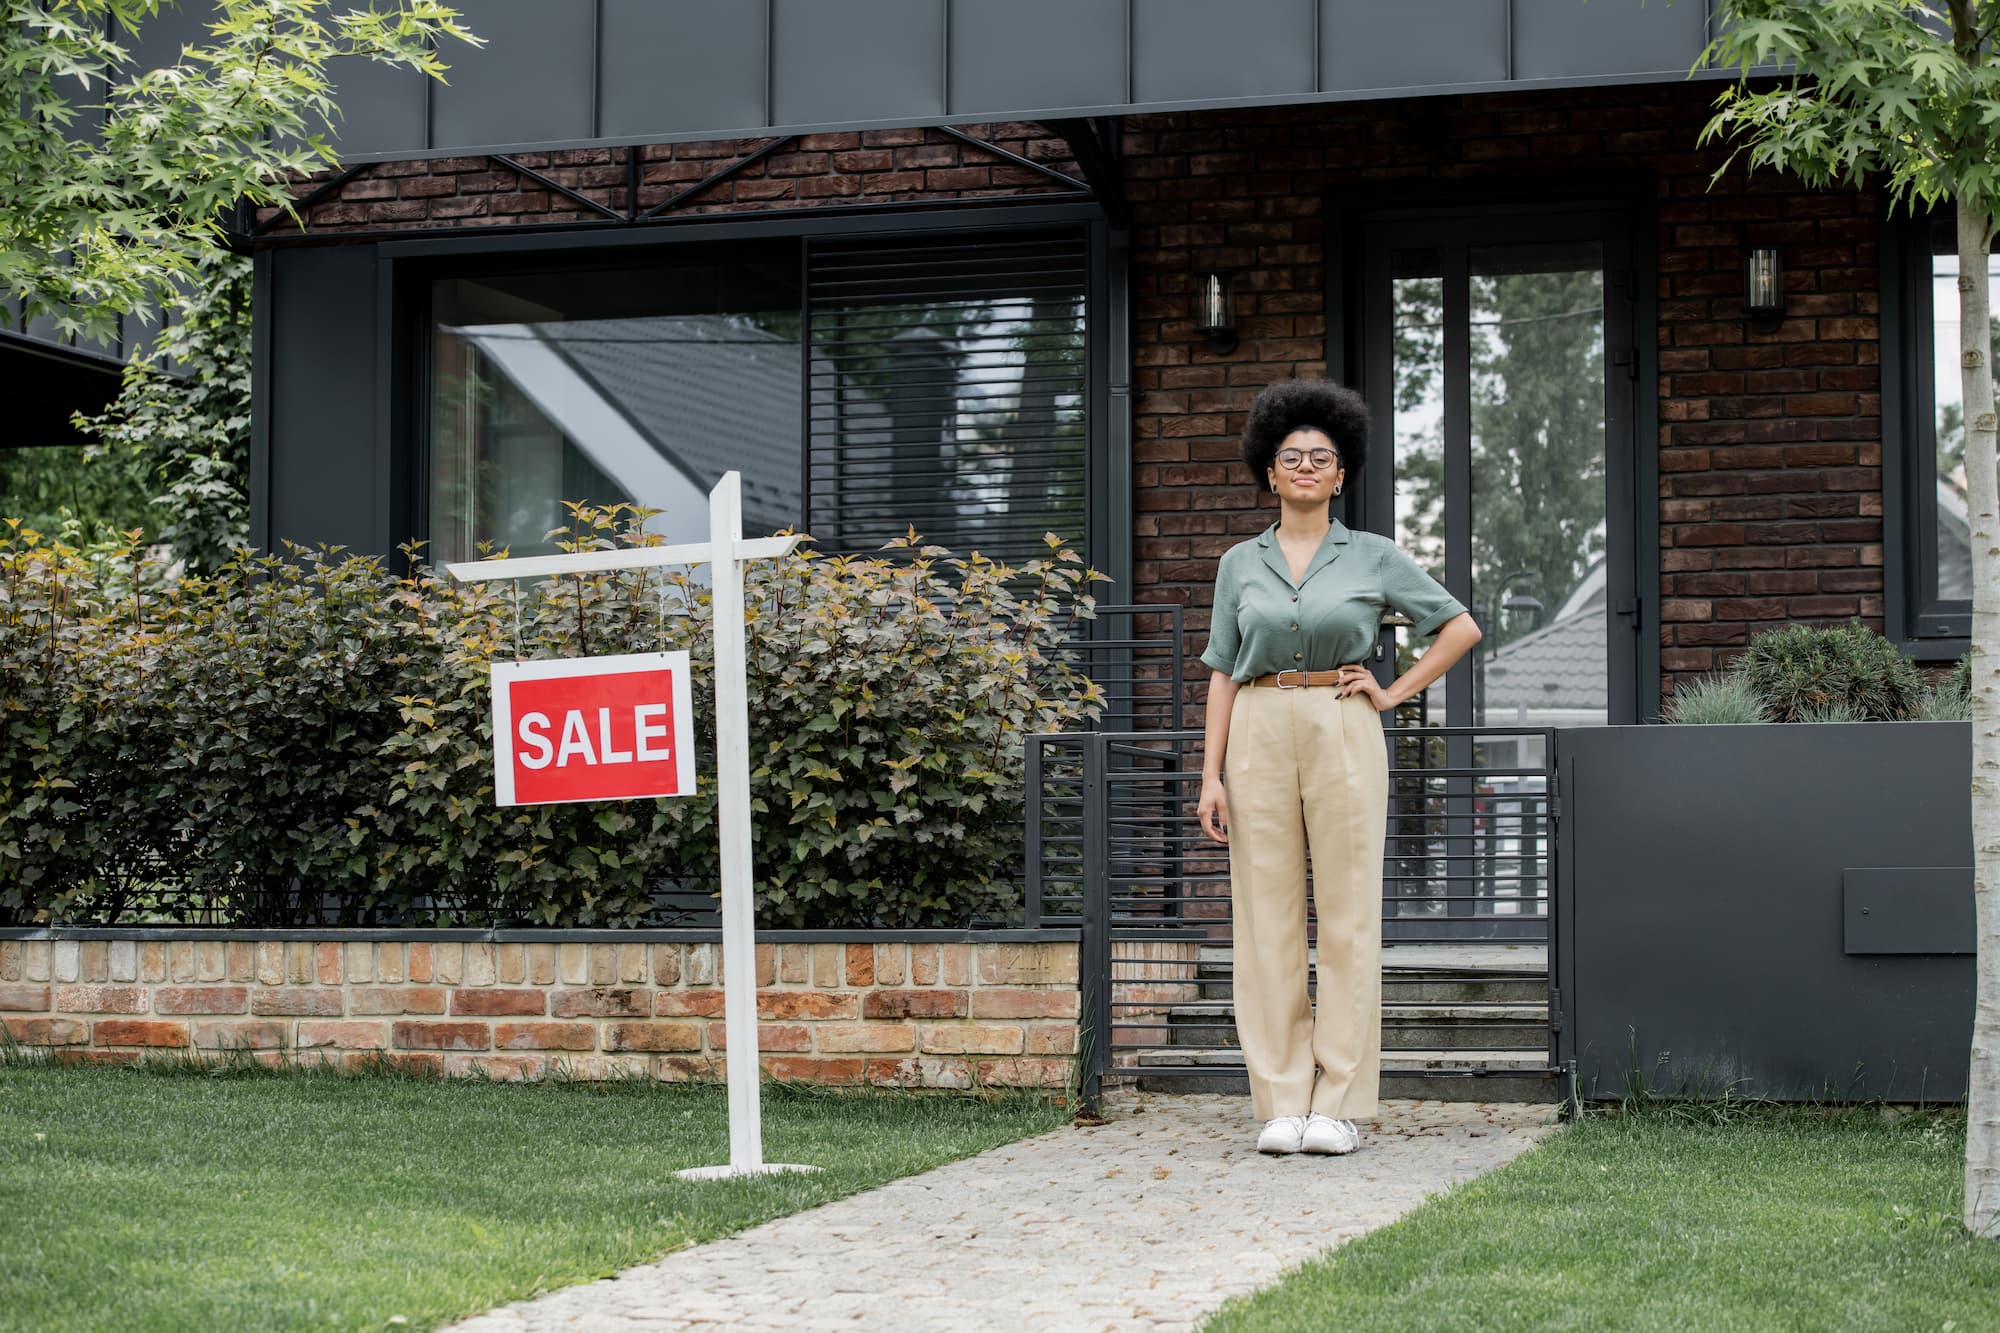 Common myths about cash home sales debunked - what you need to know